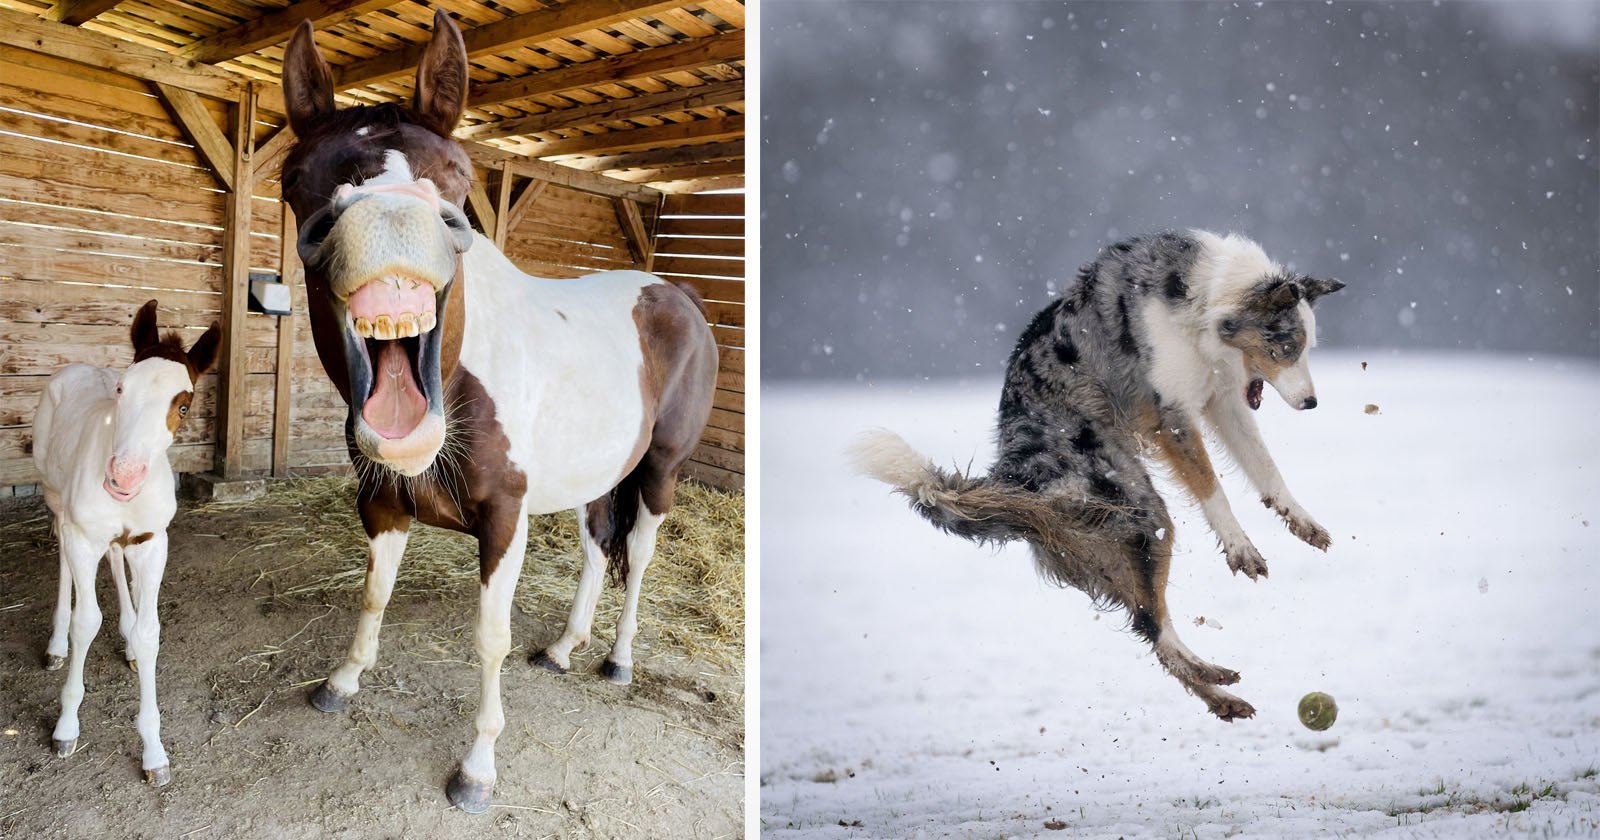 26 of the Funniest Finalists in the 2022 Comedy Pet Photo Awards